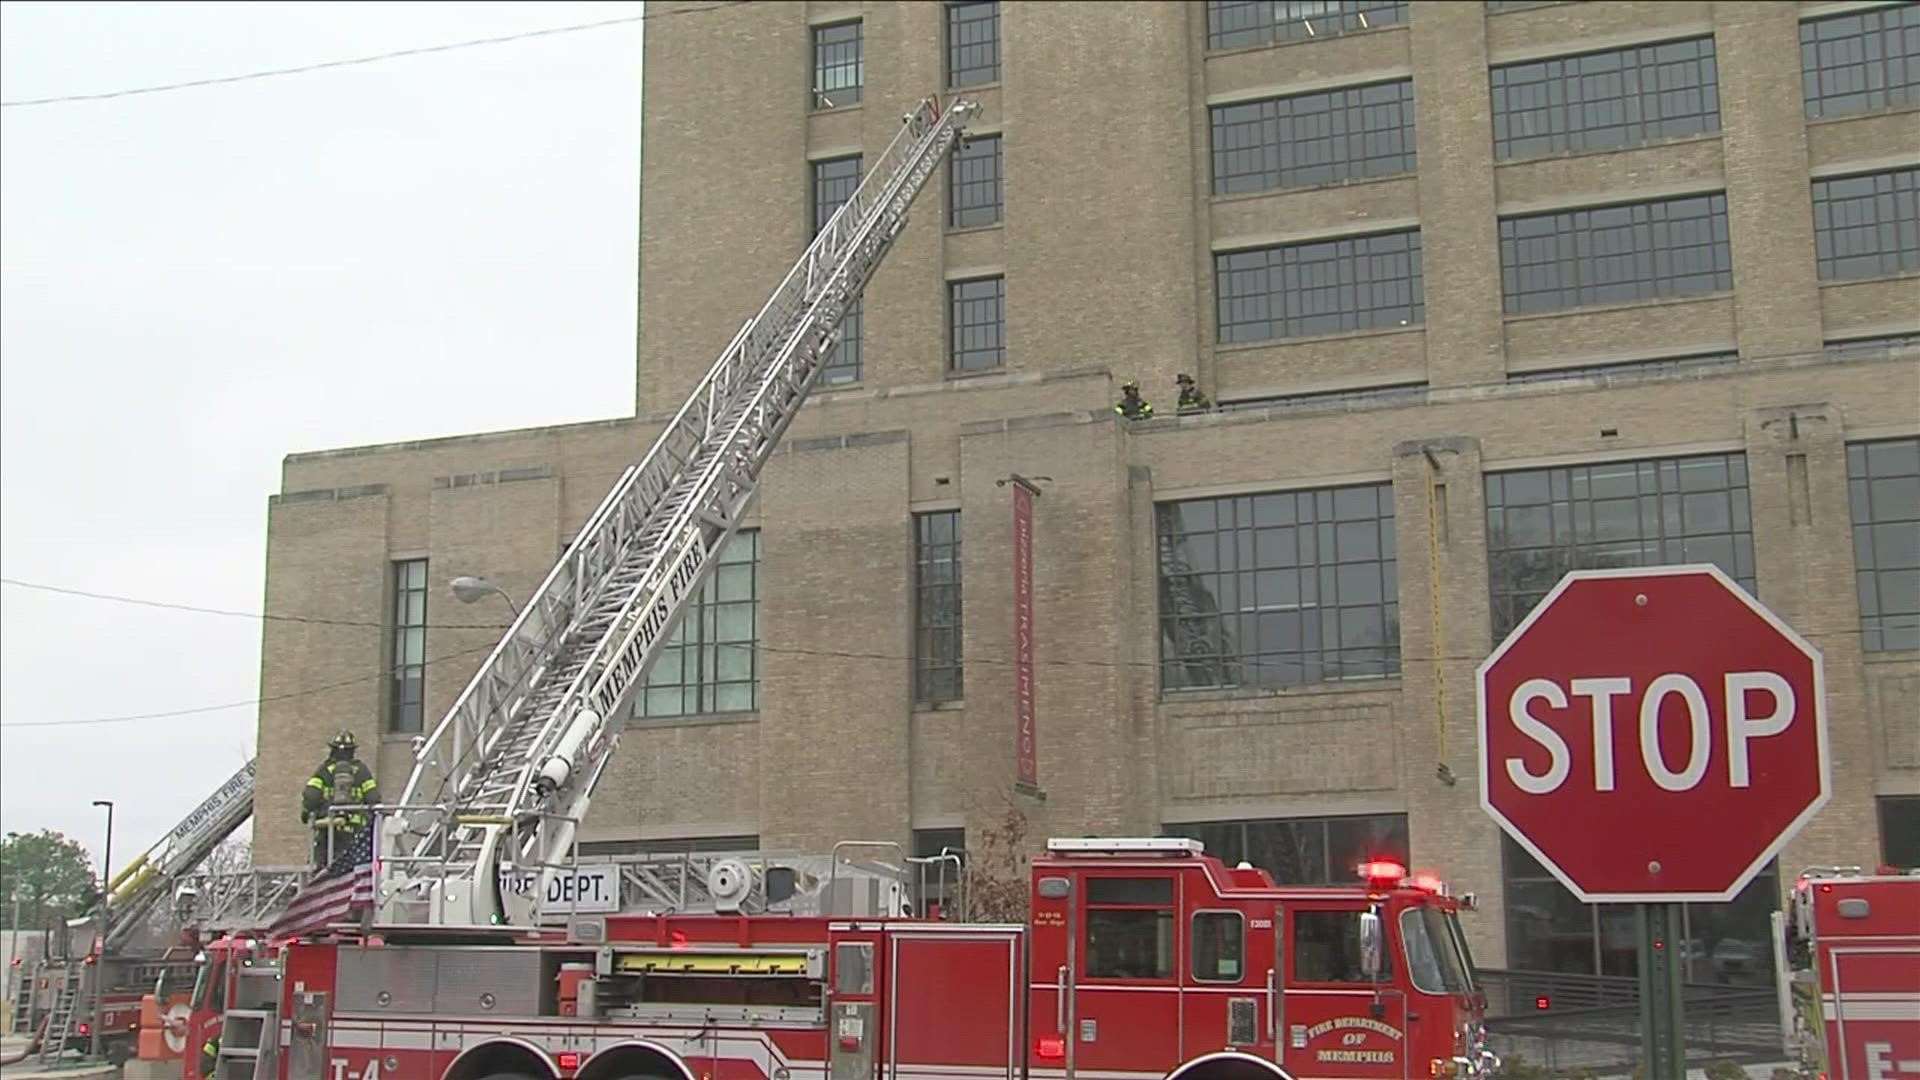 The Memphis Fire Department said they responded just before noon at the building in the 1300 block of Concourse, near Cleveland in midtown Memphis.